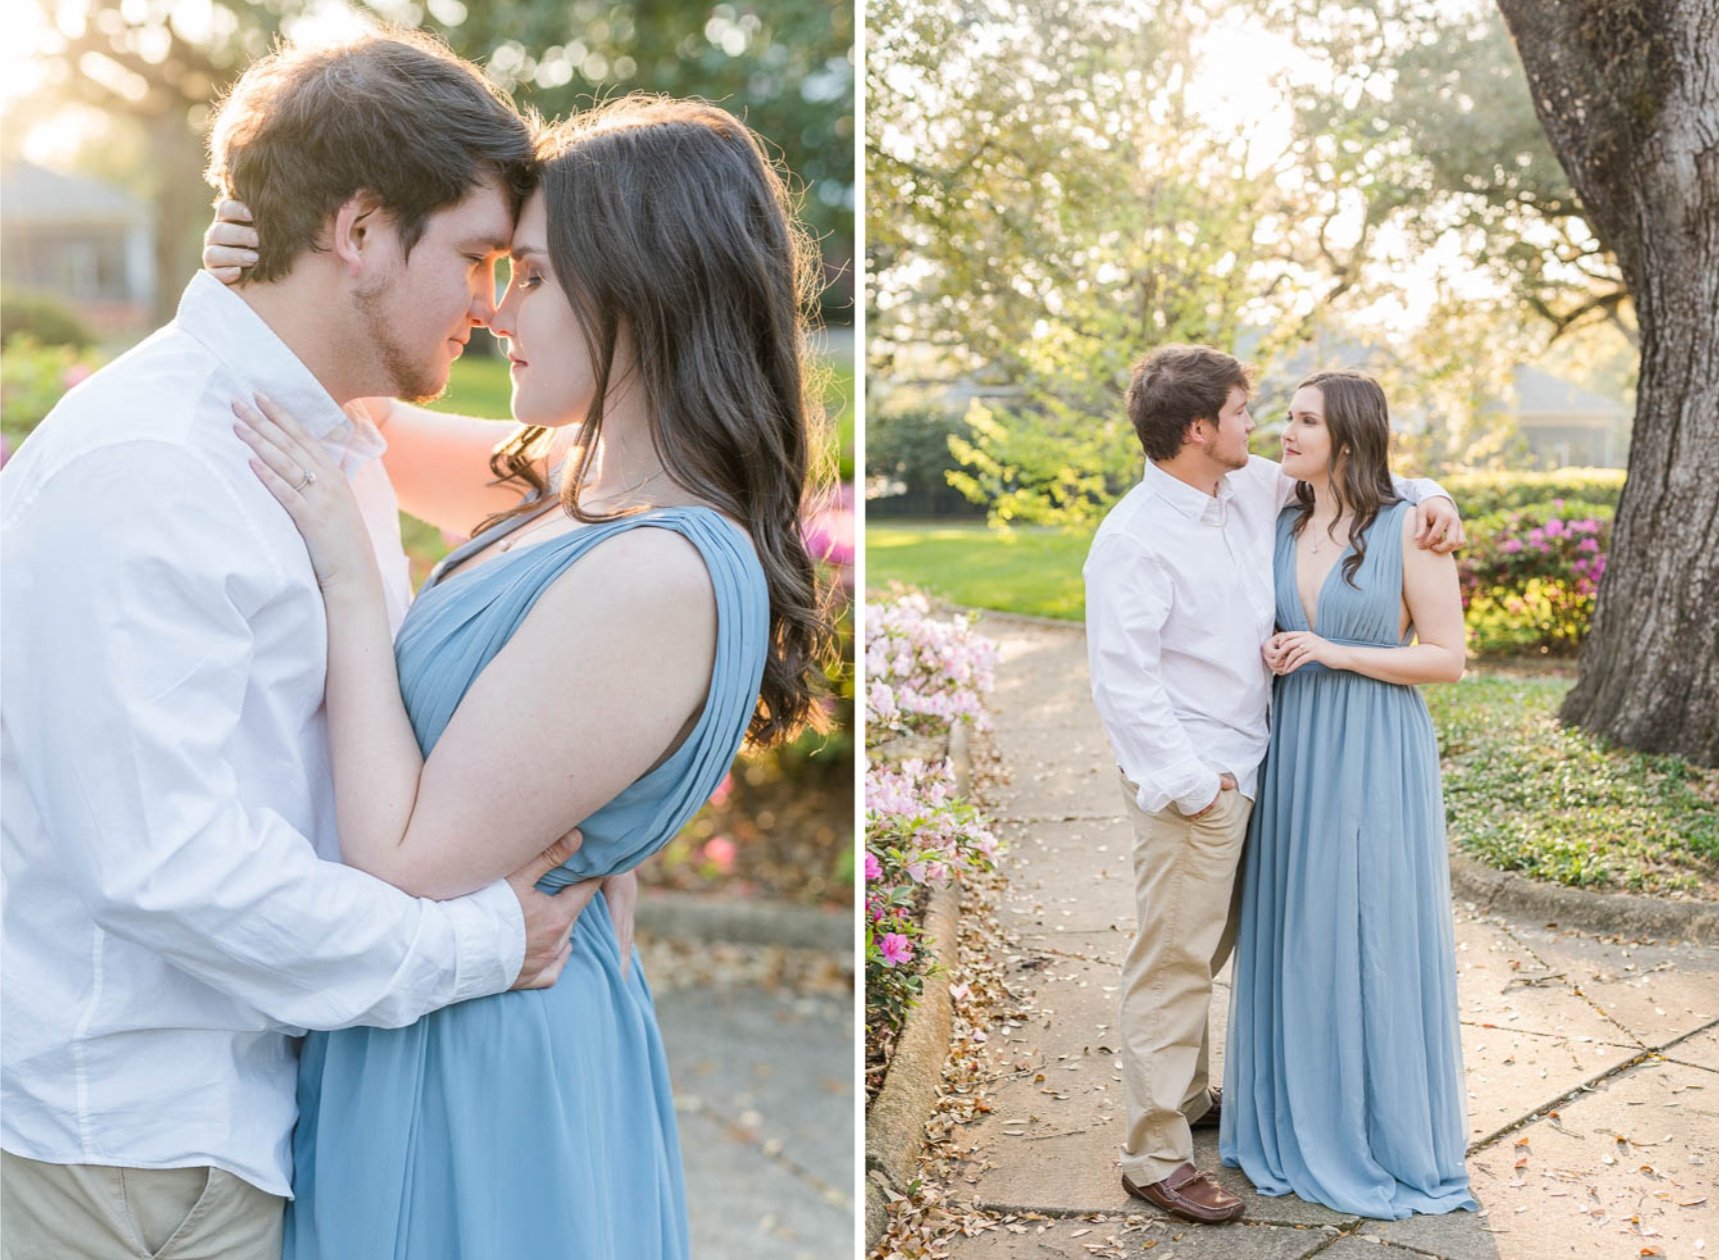 Washington Square Park Engagement Session Photoshoot in Spring in Midtown Mobile, Alabama Photographed by Kristen Marcus Photography 